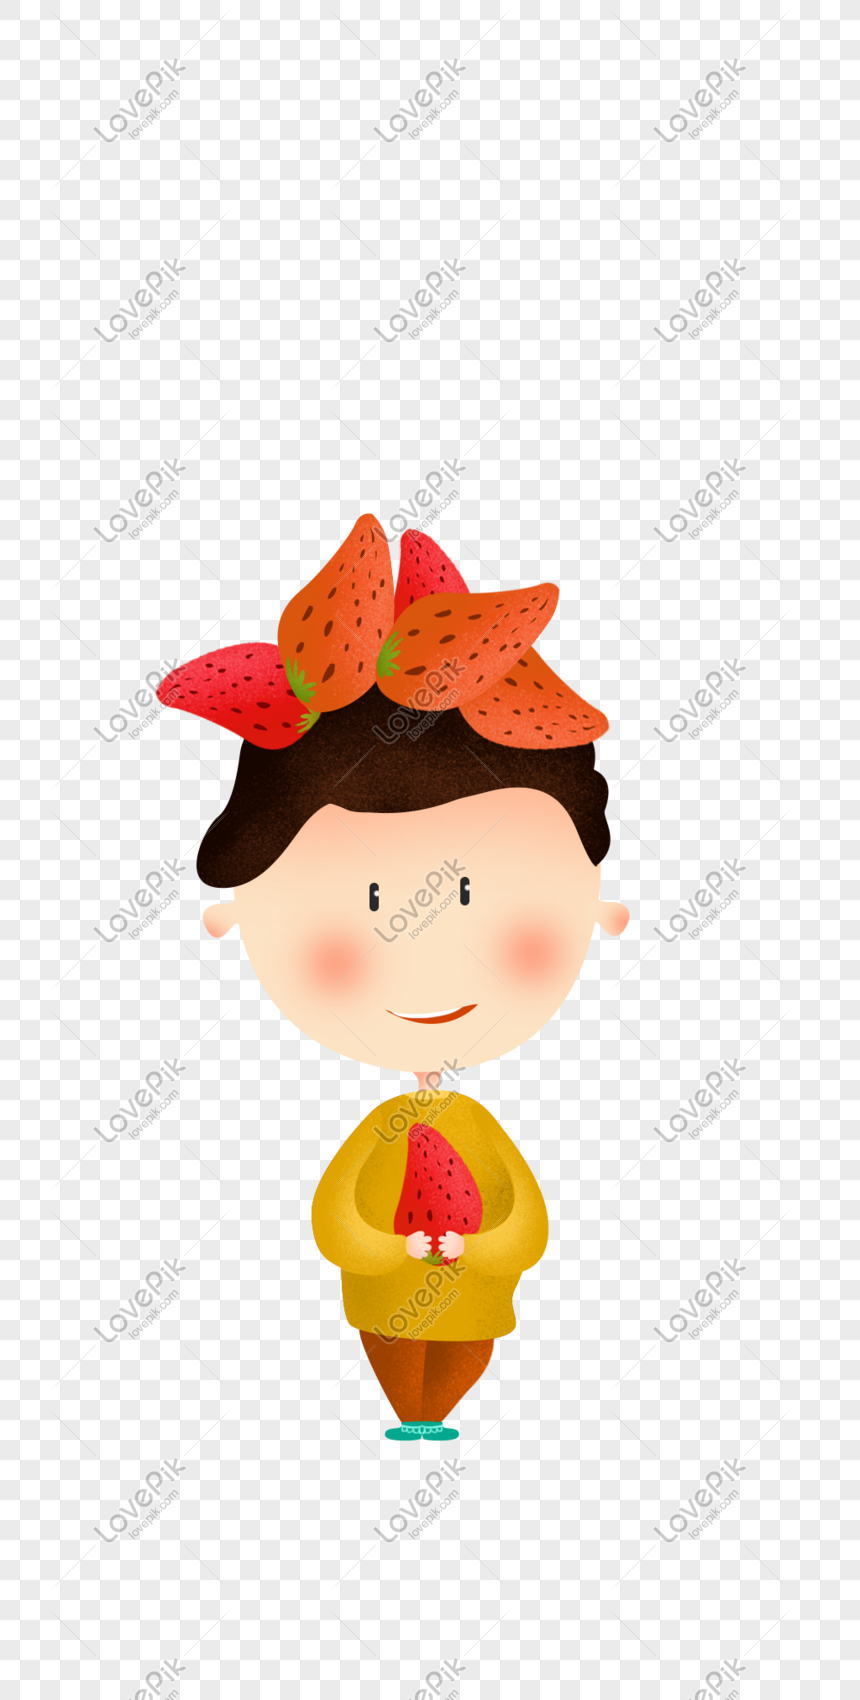 strawberry shortcake png image picture free download 401054332 lovepik com strawberry shortcake png image picture